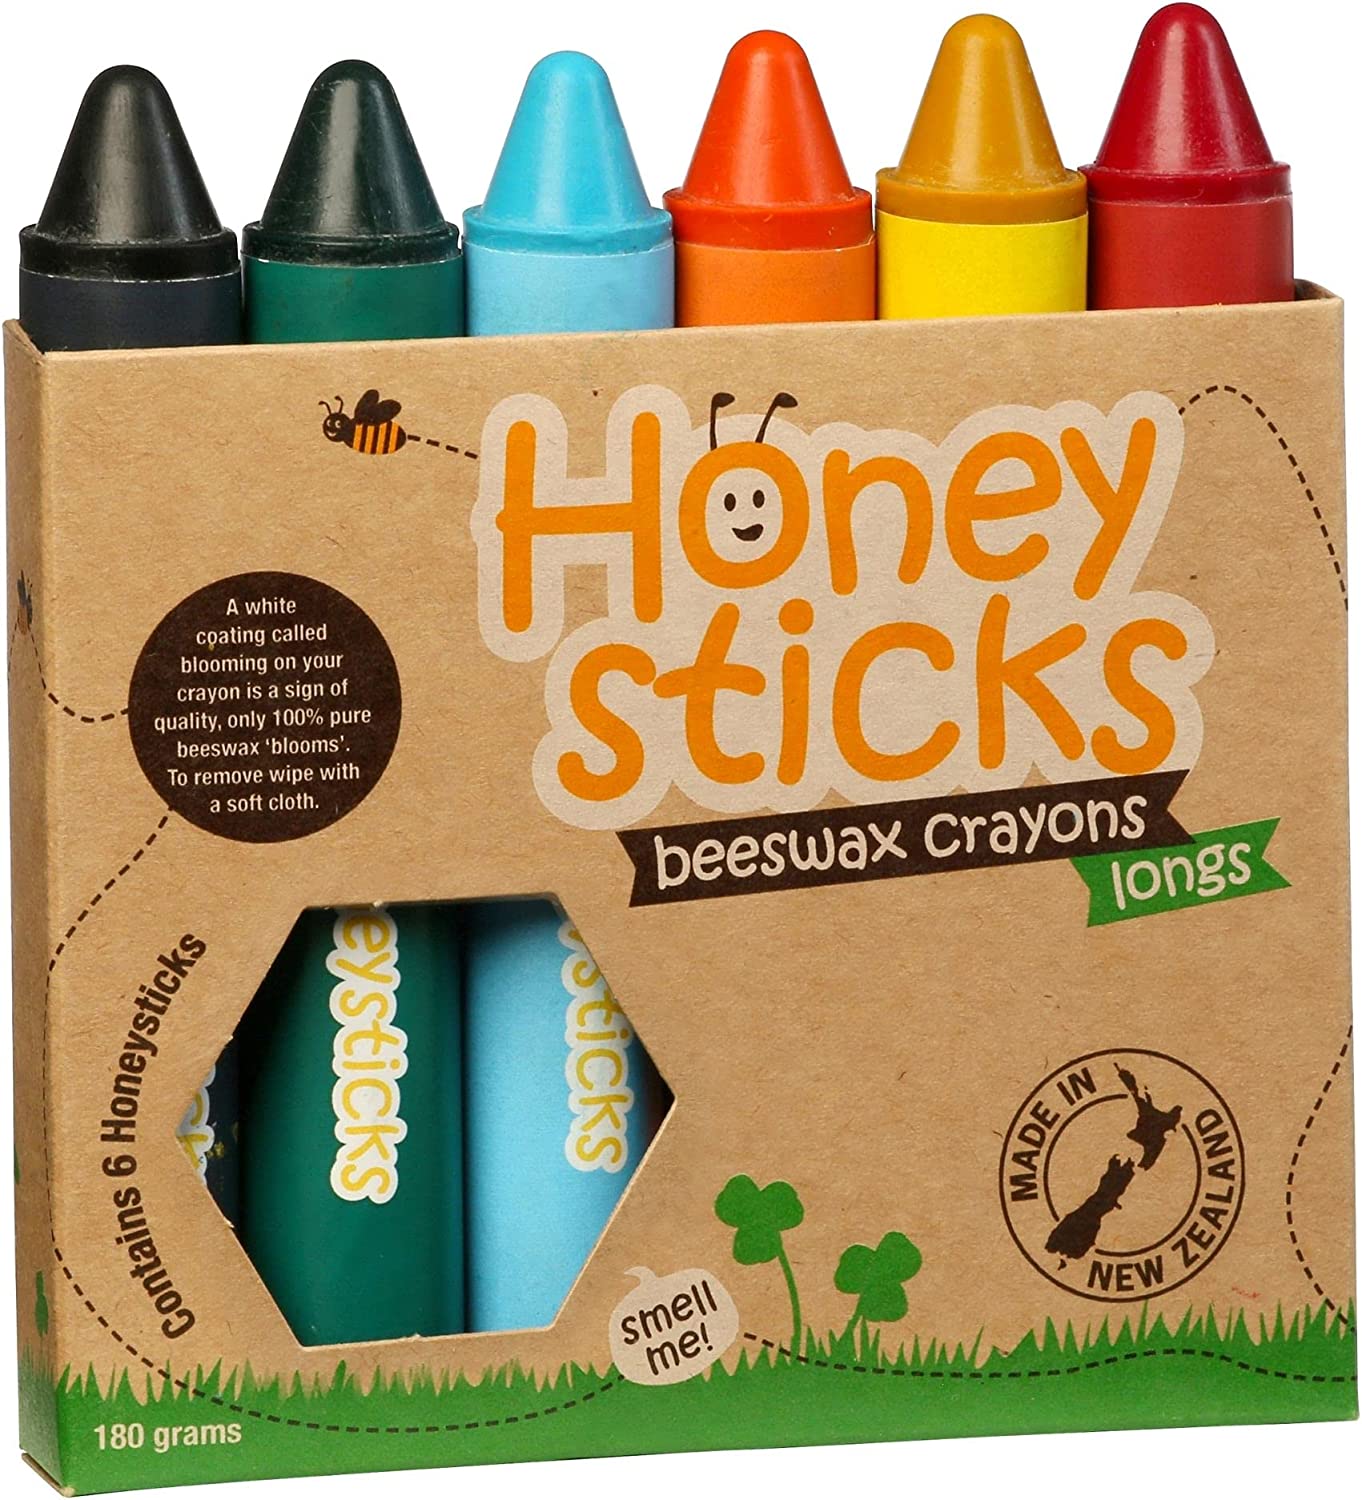 Your Guide to the 100% Natural Honeysticks Crayons